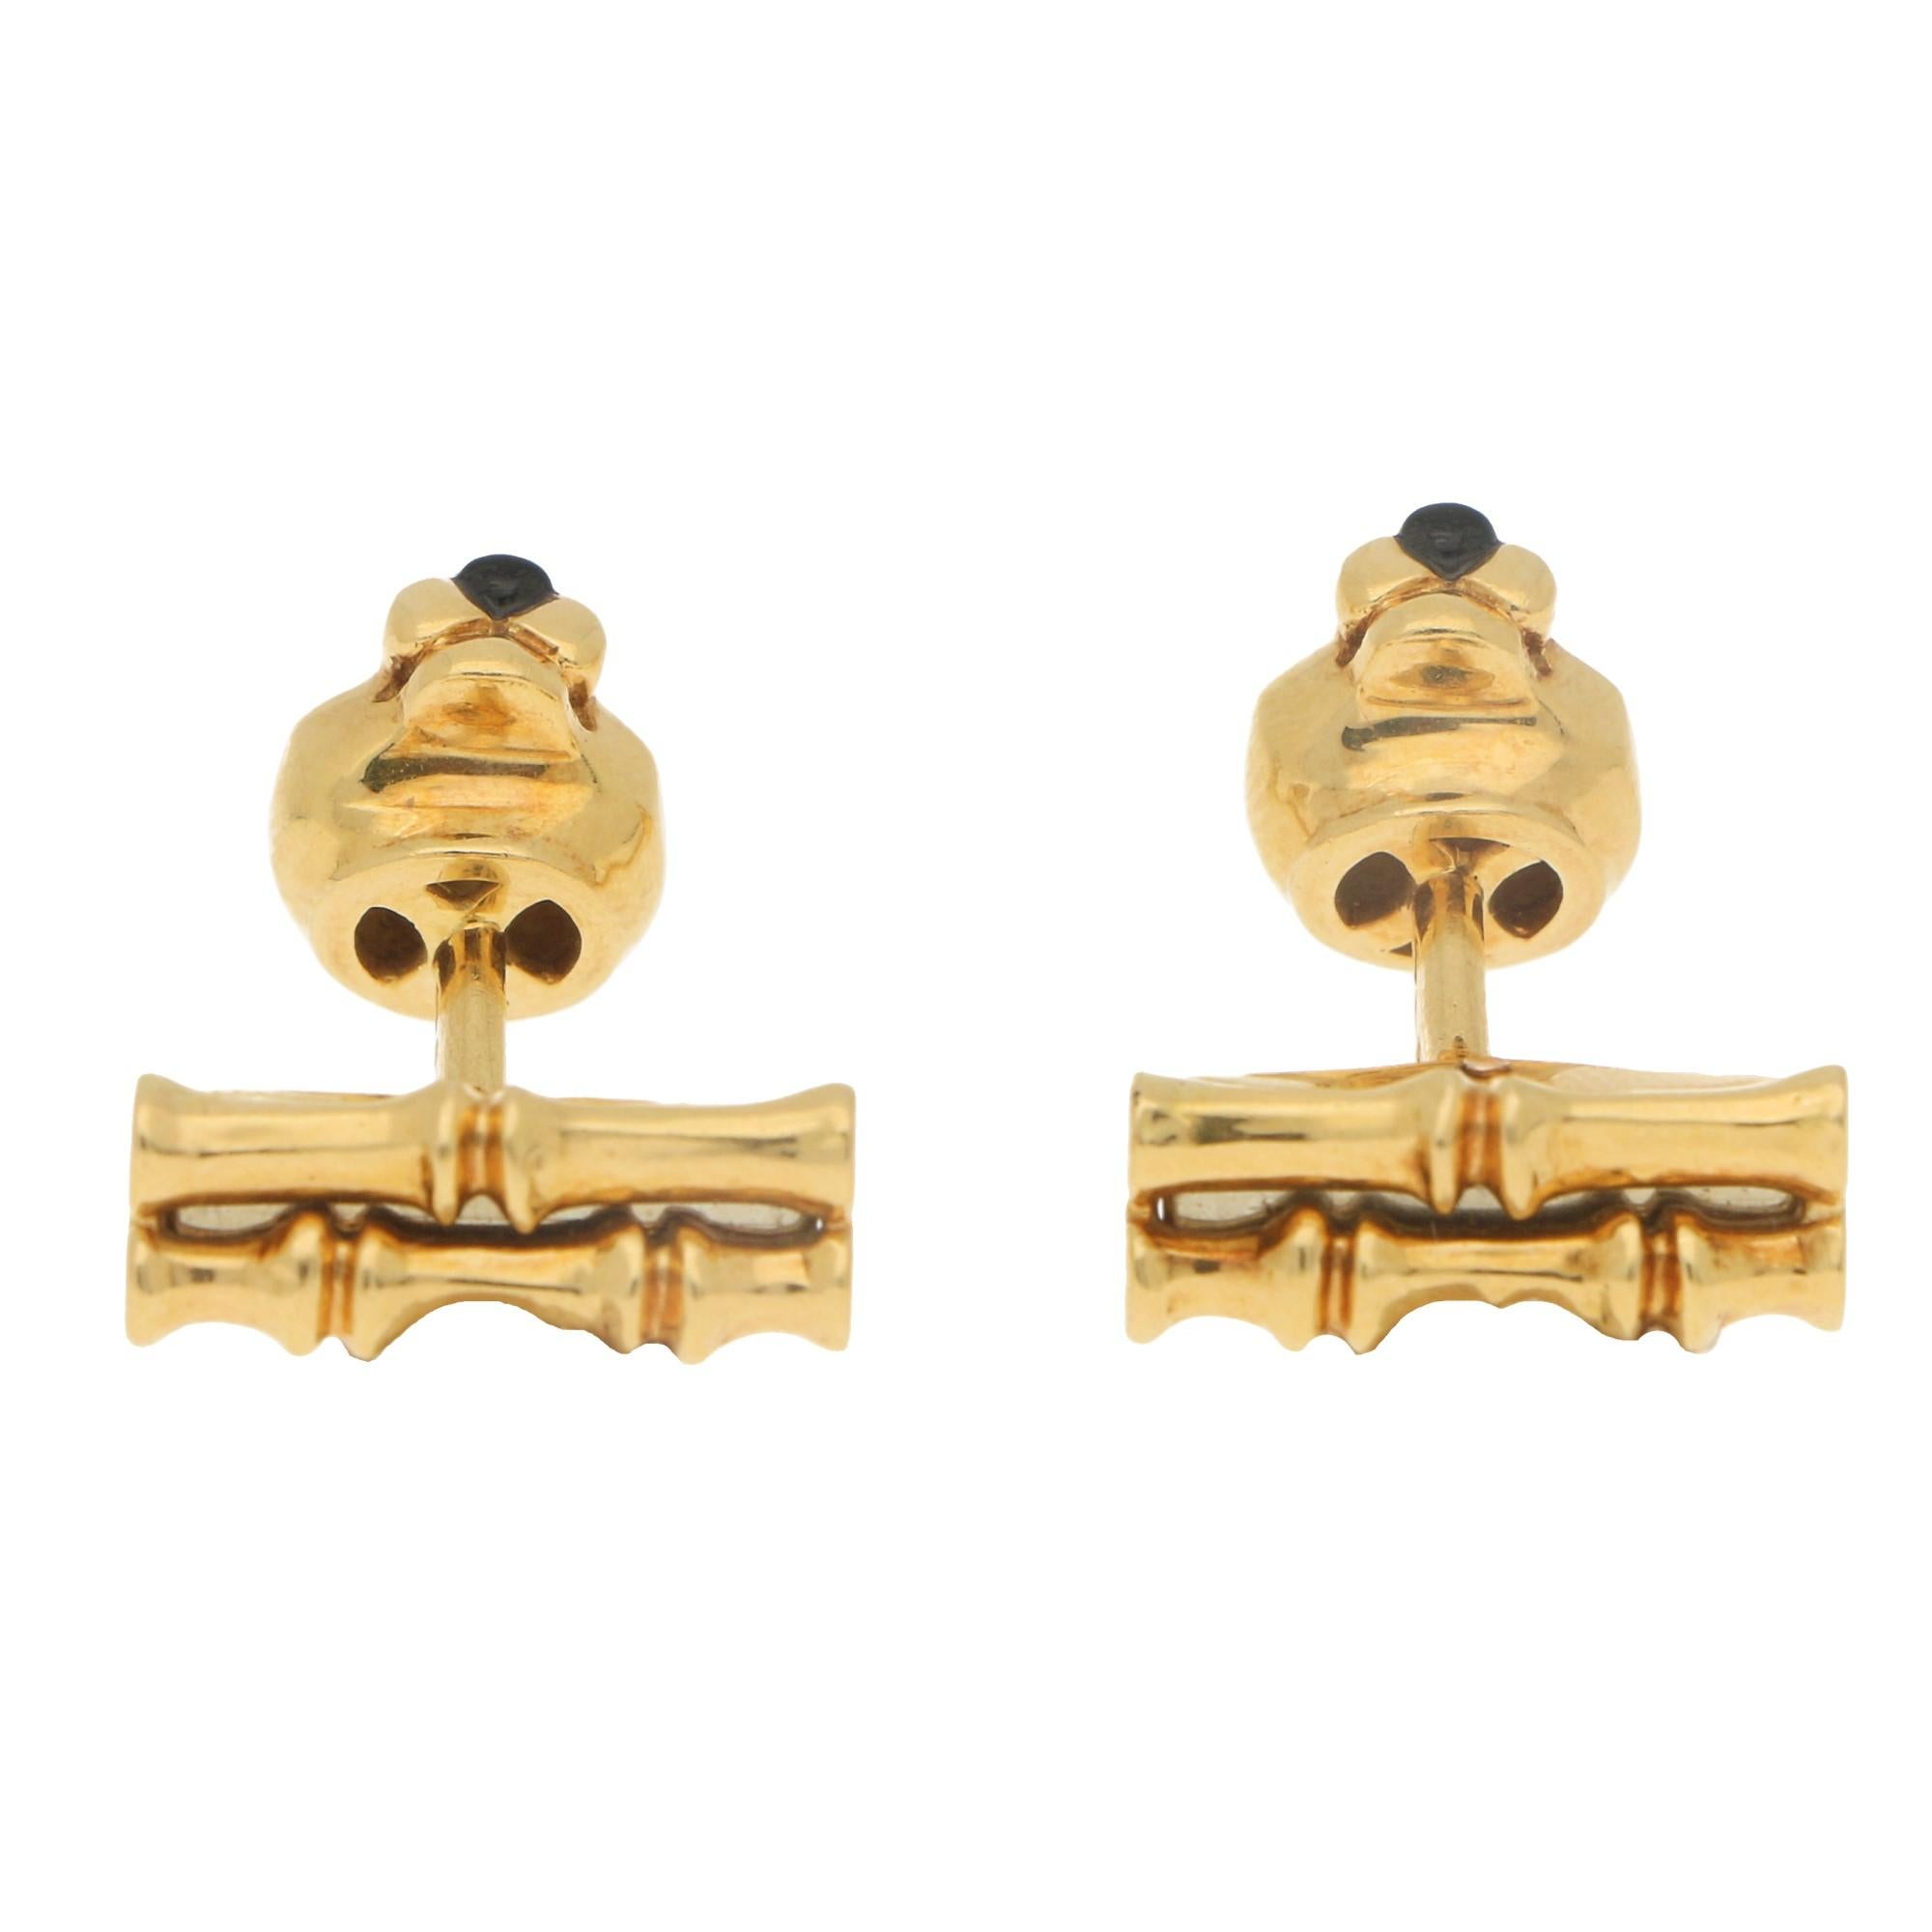 A fabulous pair of Panthère de Cartier cufflinks set in 18k yellow gold. Each cufflink features as a panthers head set with two round cut emerald eyes and a cute onyx nose. The heads are joined by a gold post to a bamboo motif swivel back bar.

Each